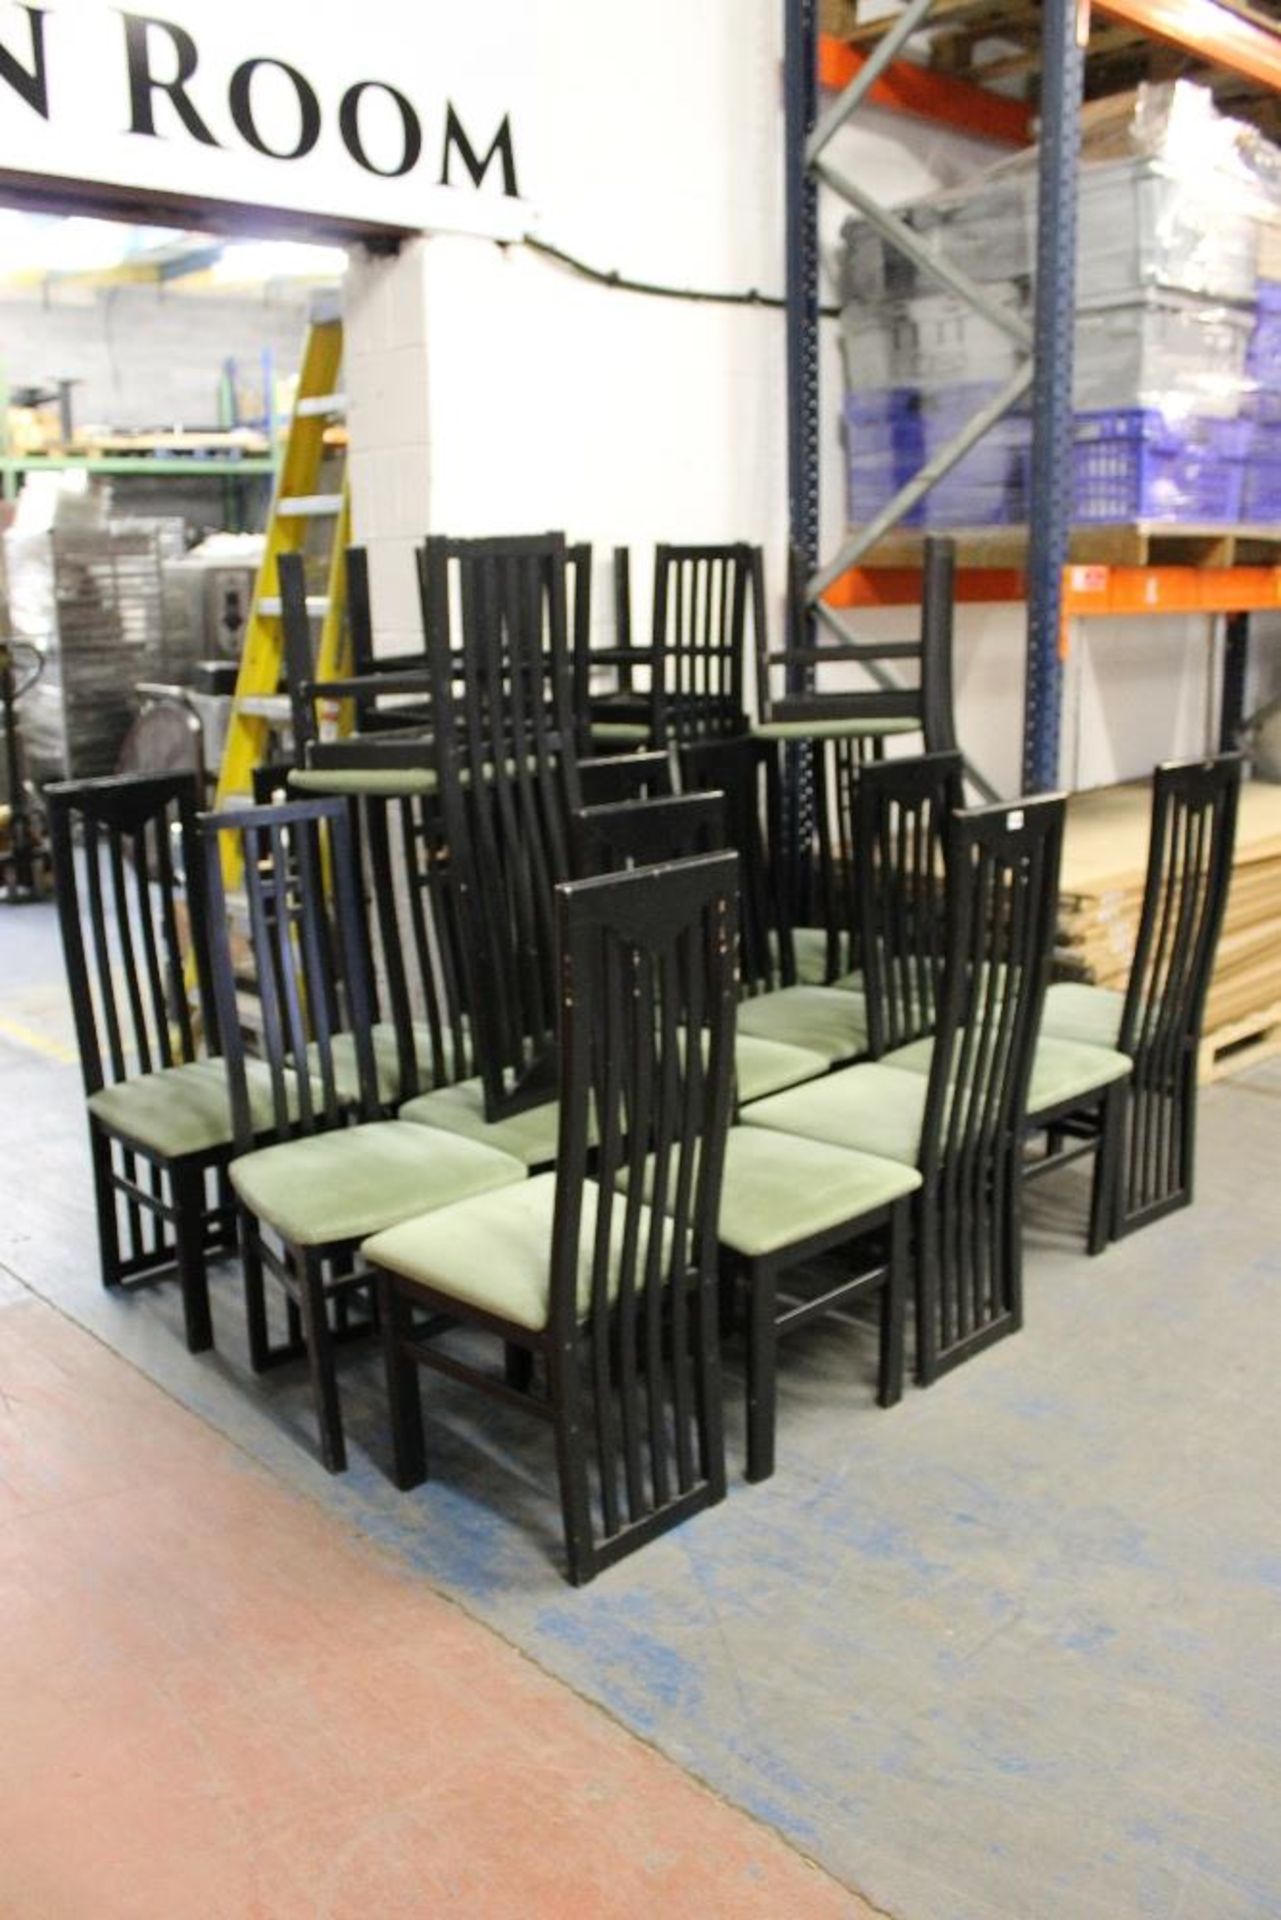 Job Lot of 19 Restaurant Dining Chairs – Black Wood with Green Fabric Seats - Image 3 of 3